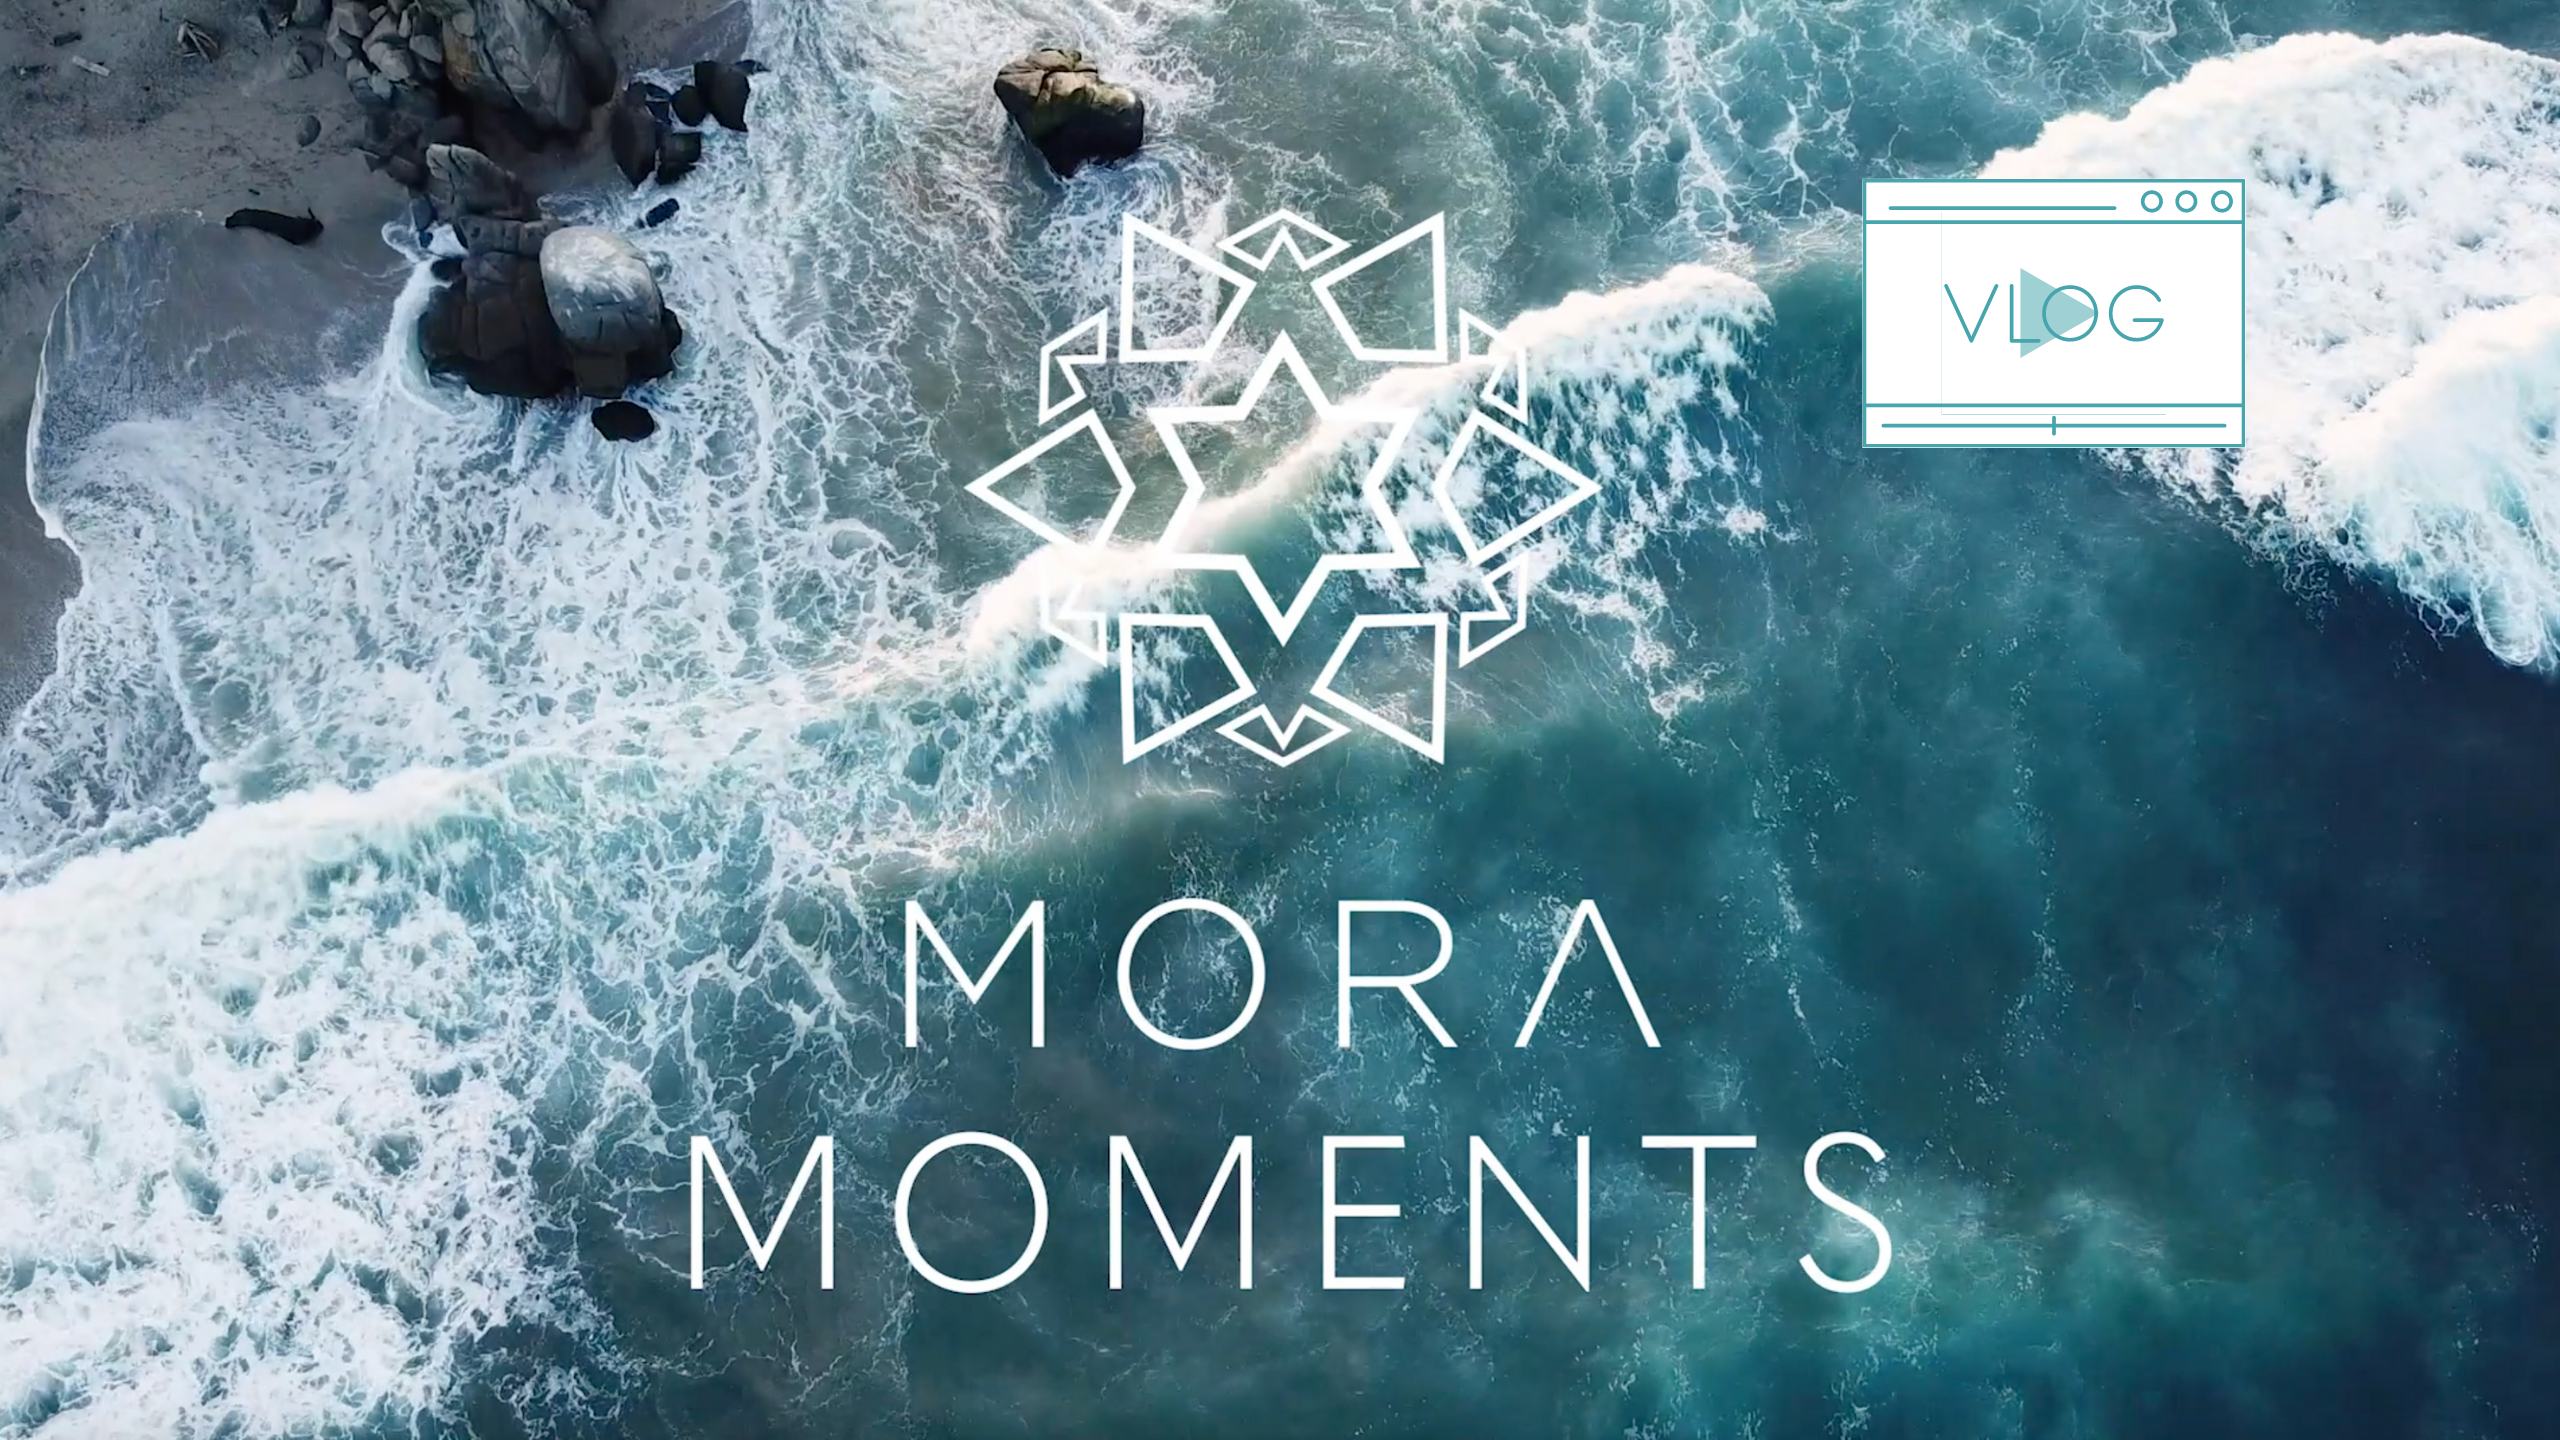 mora moments vlog, aerial shot of ocean breaking with logo and brand name overlaid